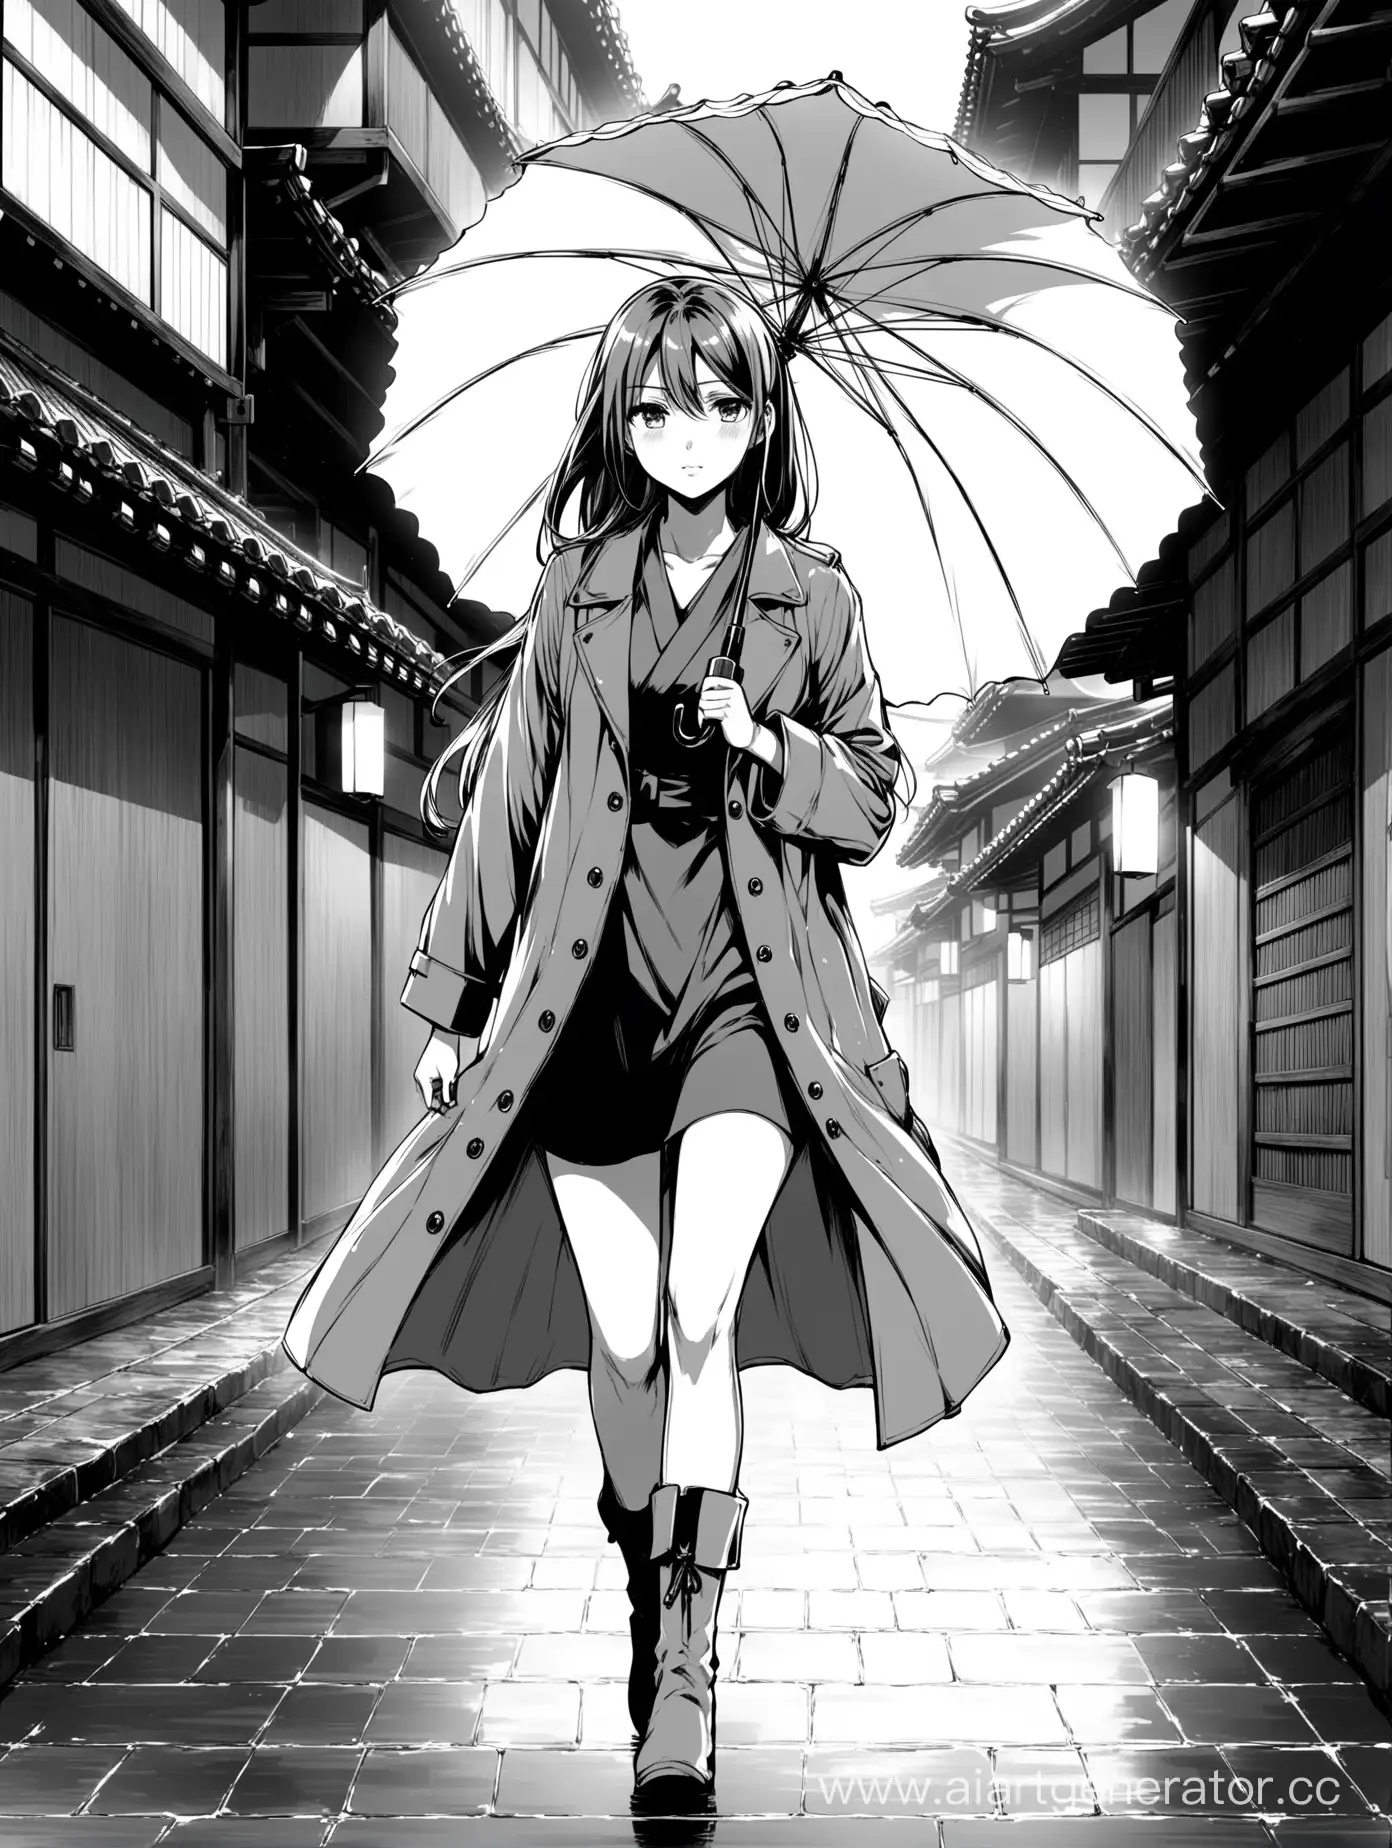 Anime-Girl-Strolling-with-Umbrella-in-Chic-Outfit